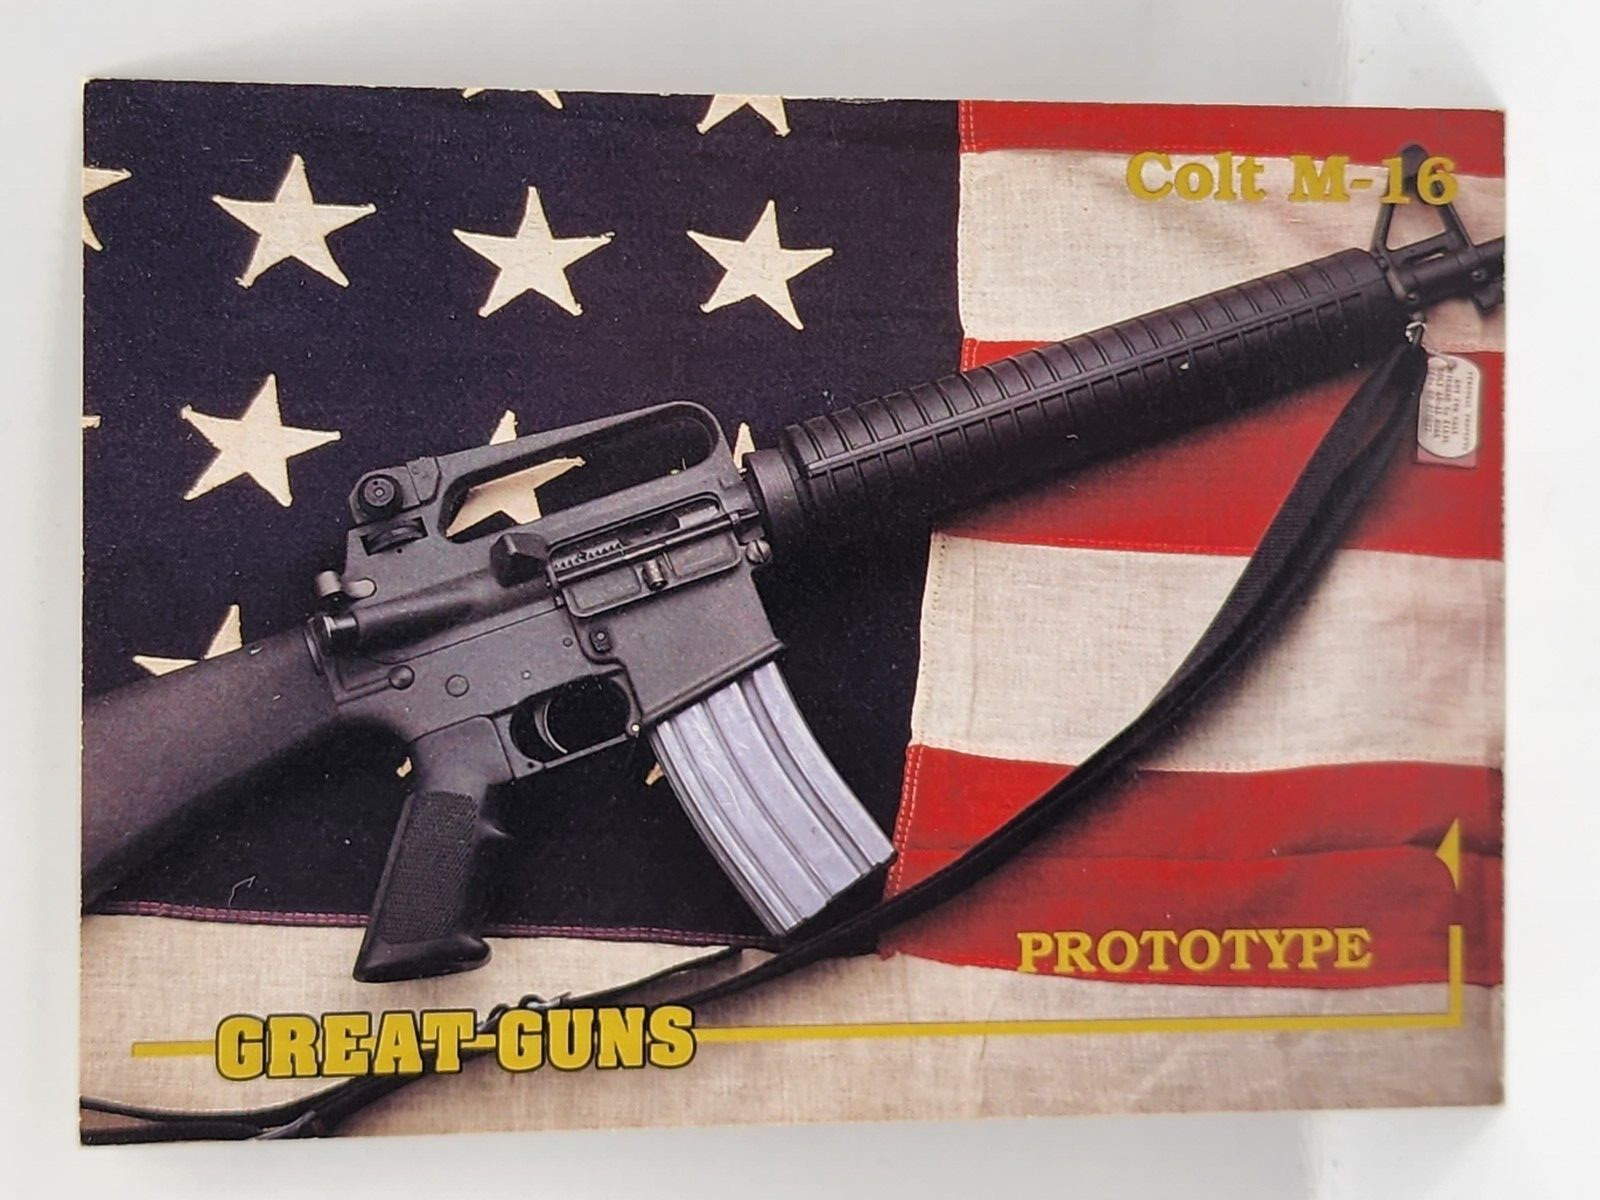 1993 Performance Years Great Guns Prototype Card #1 - Colt M-16